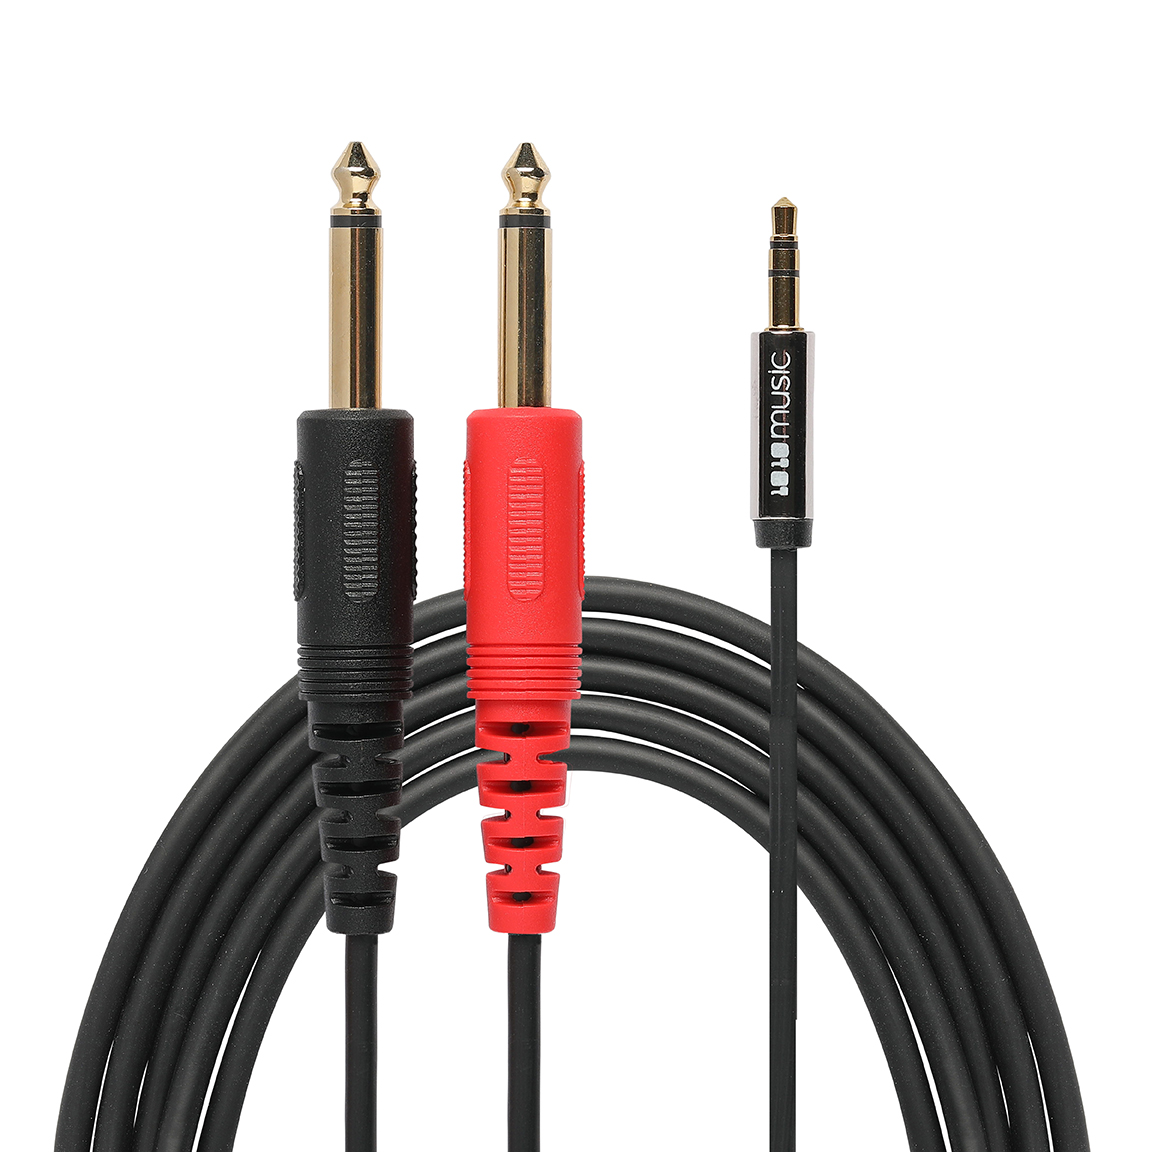 3.5 mm Male to Male Stereo Breakout Cable